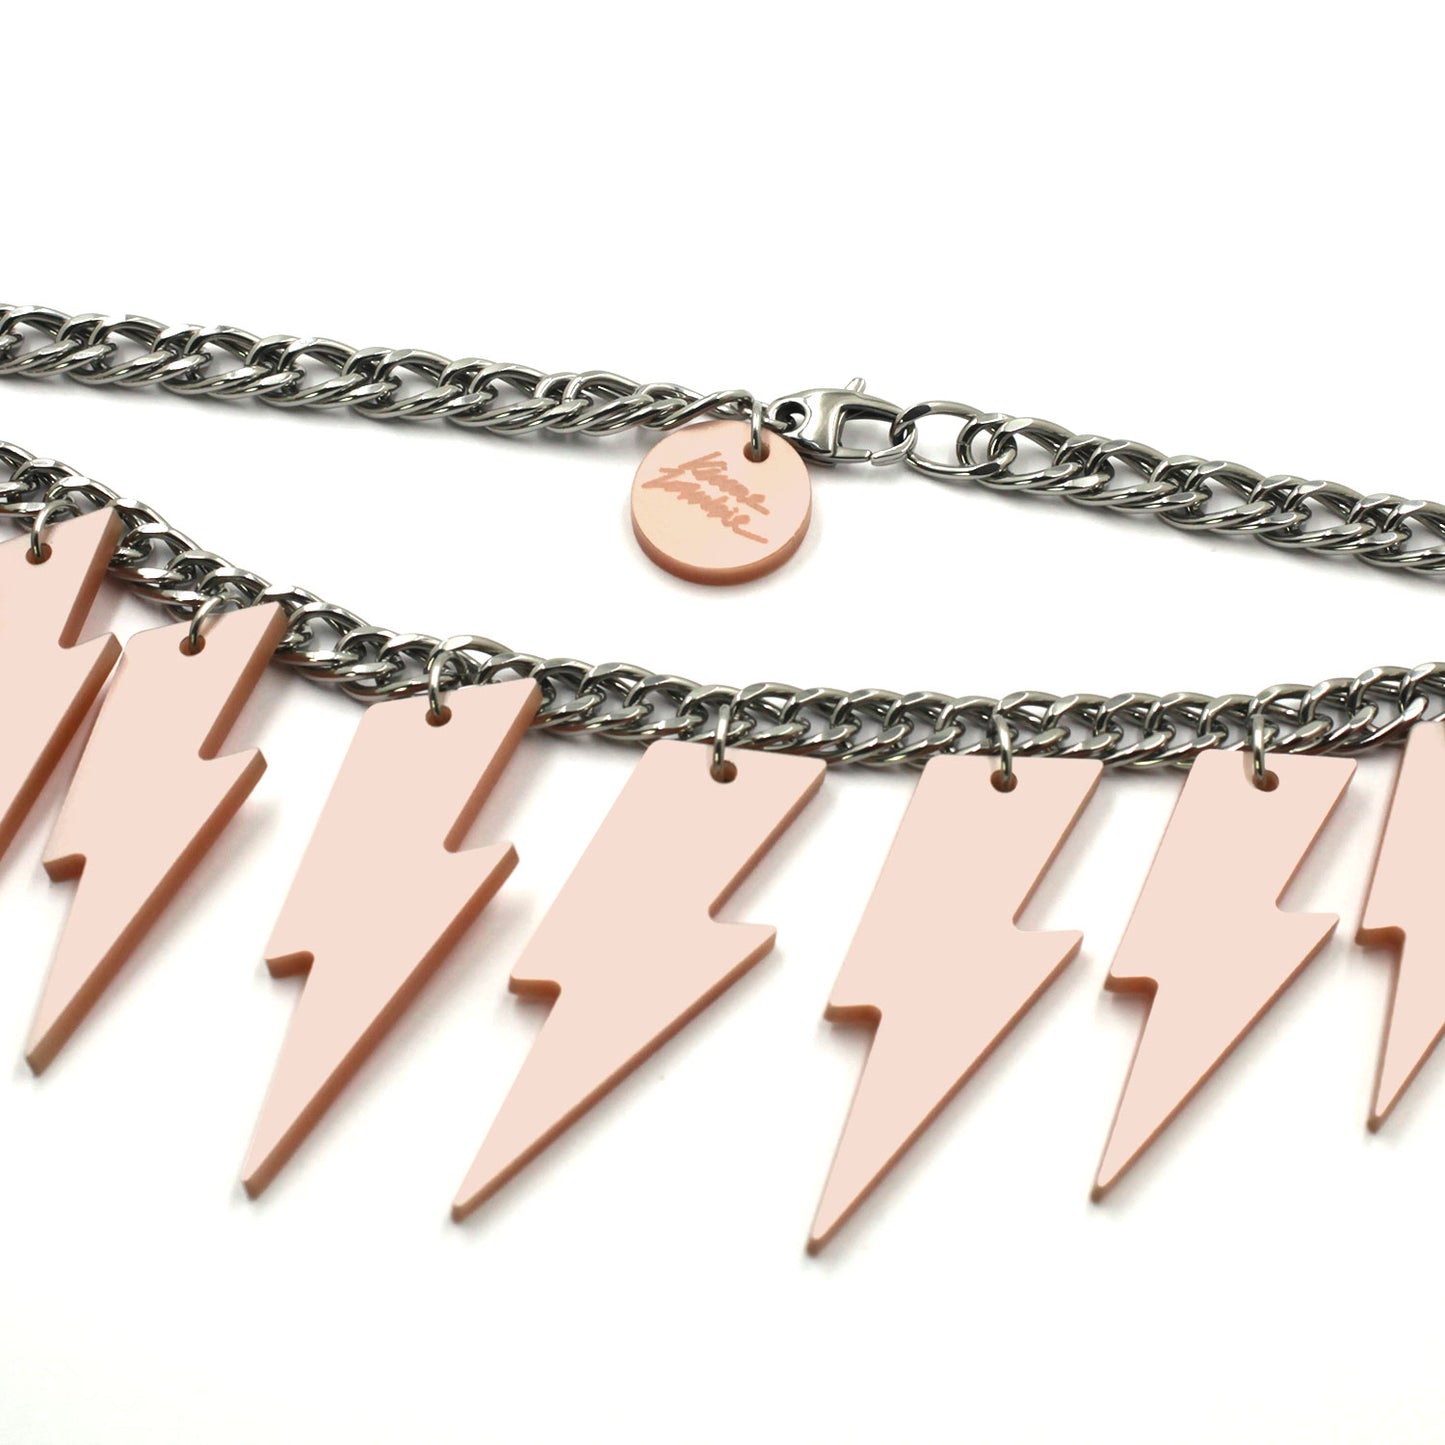 This is close up photo of a necklace composed of a chunky silver tone curb chain pink pearly lightning bolts of graduant size on a white background. on the lobster clasp there is a round charm with the kissmezombie logo engraved on it. 